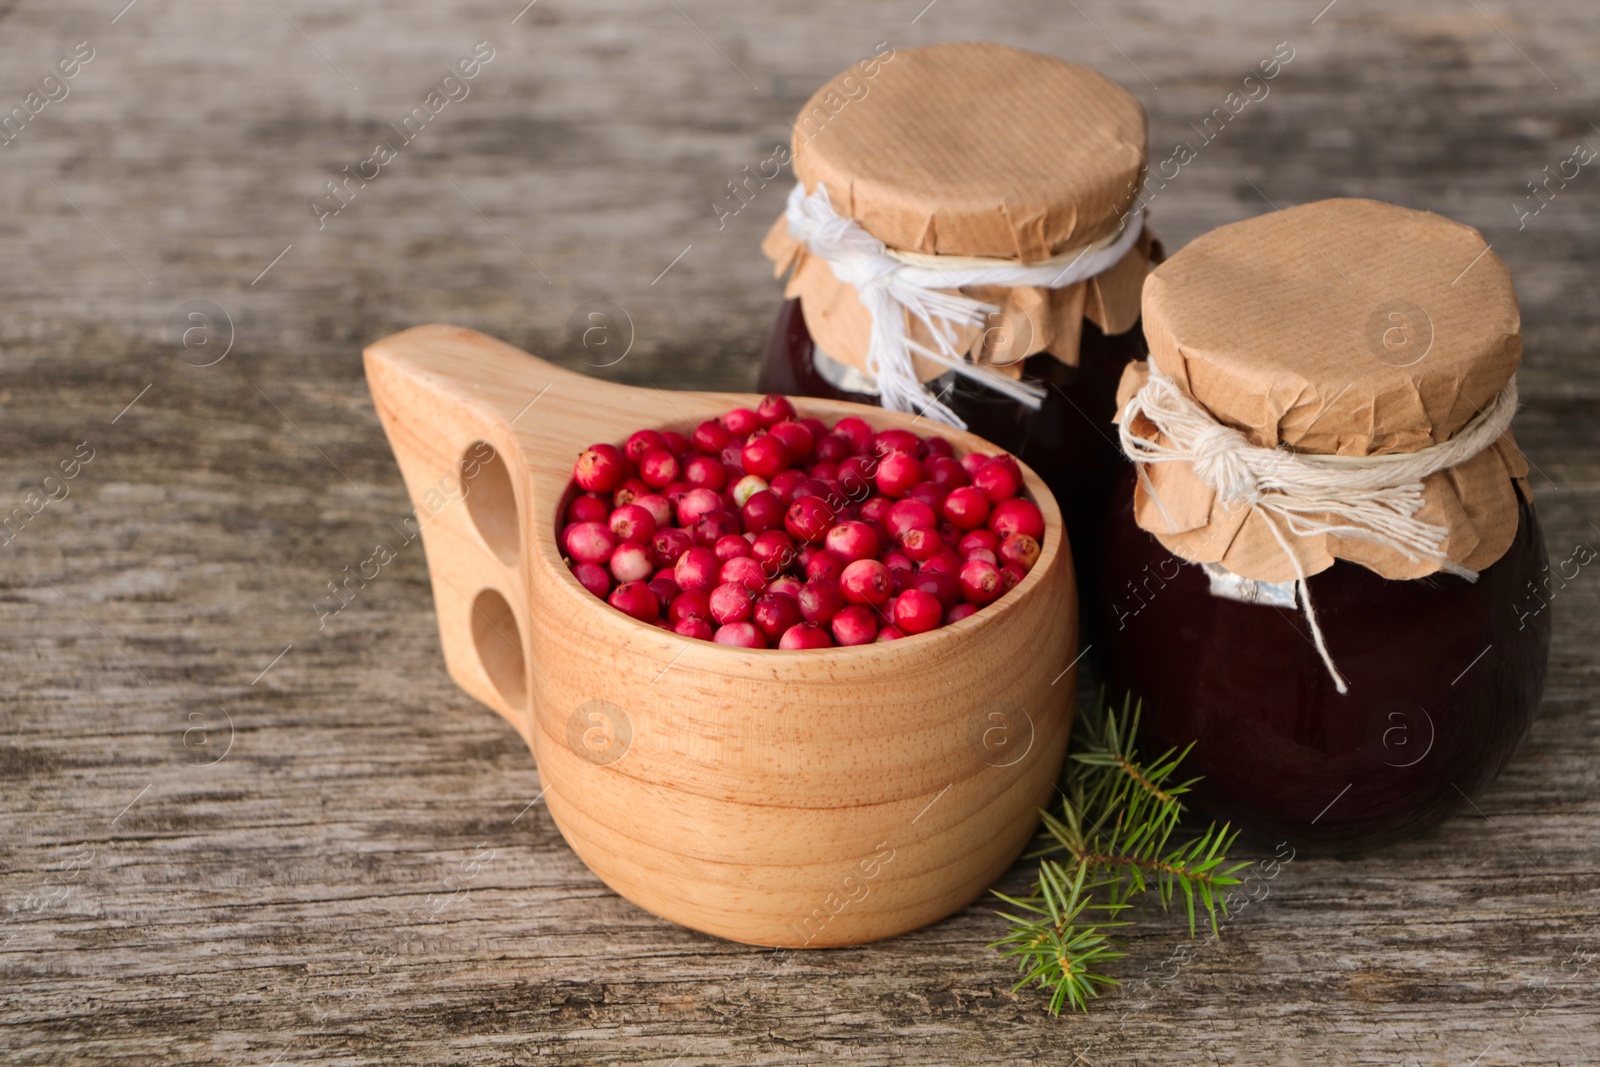 Photo of Tasty lingonberry jam in jars and cup with red berries on wooden table